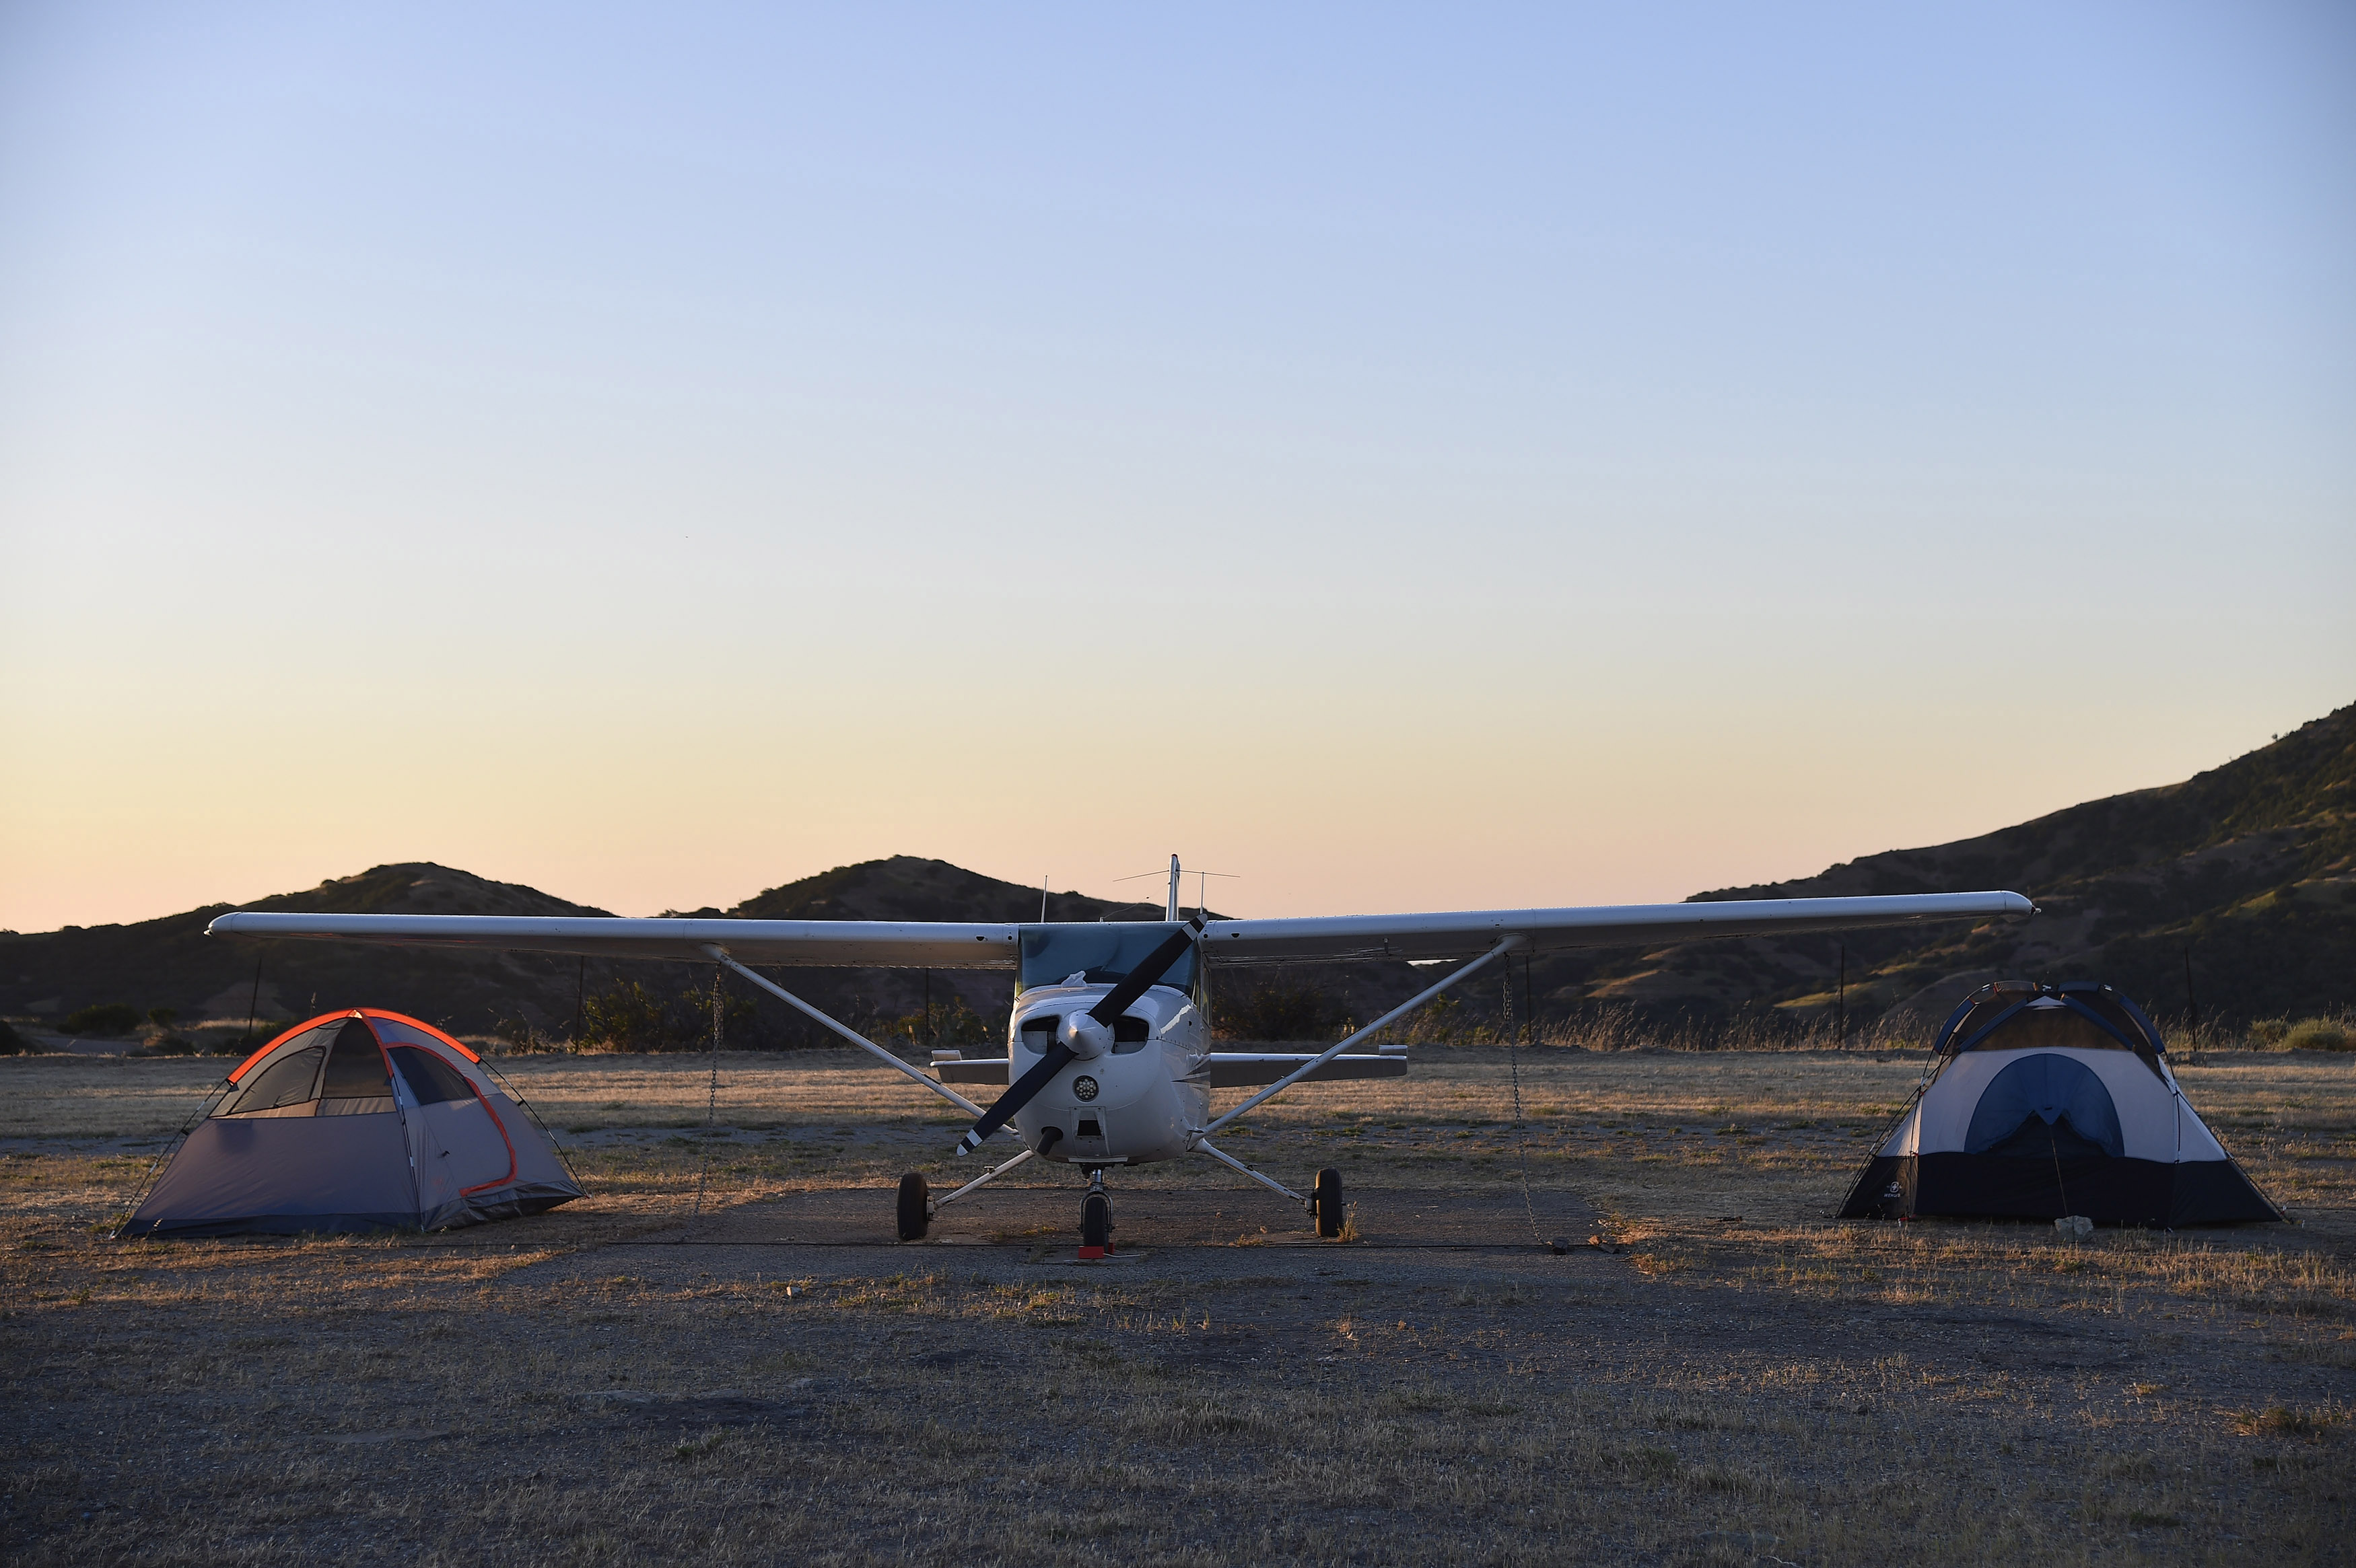 Brothers-in-law Albert Gersh and Steve Destler pitched a couple of tents next to their Cessna 172 on Catalina Island. Photo by David Tulis.